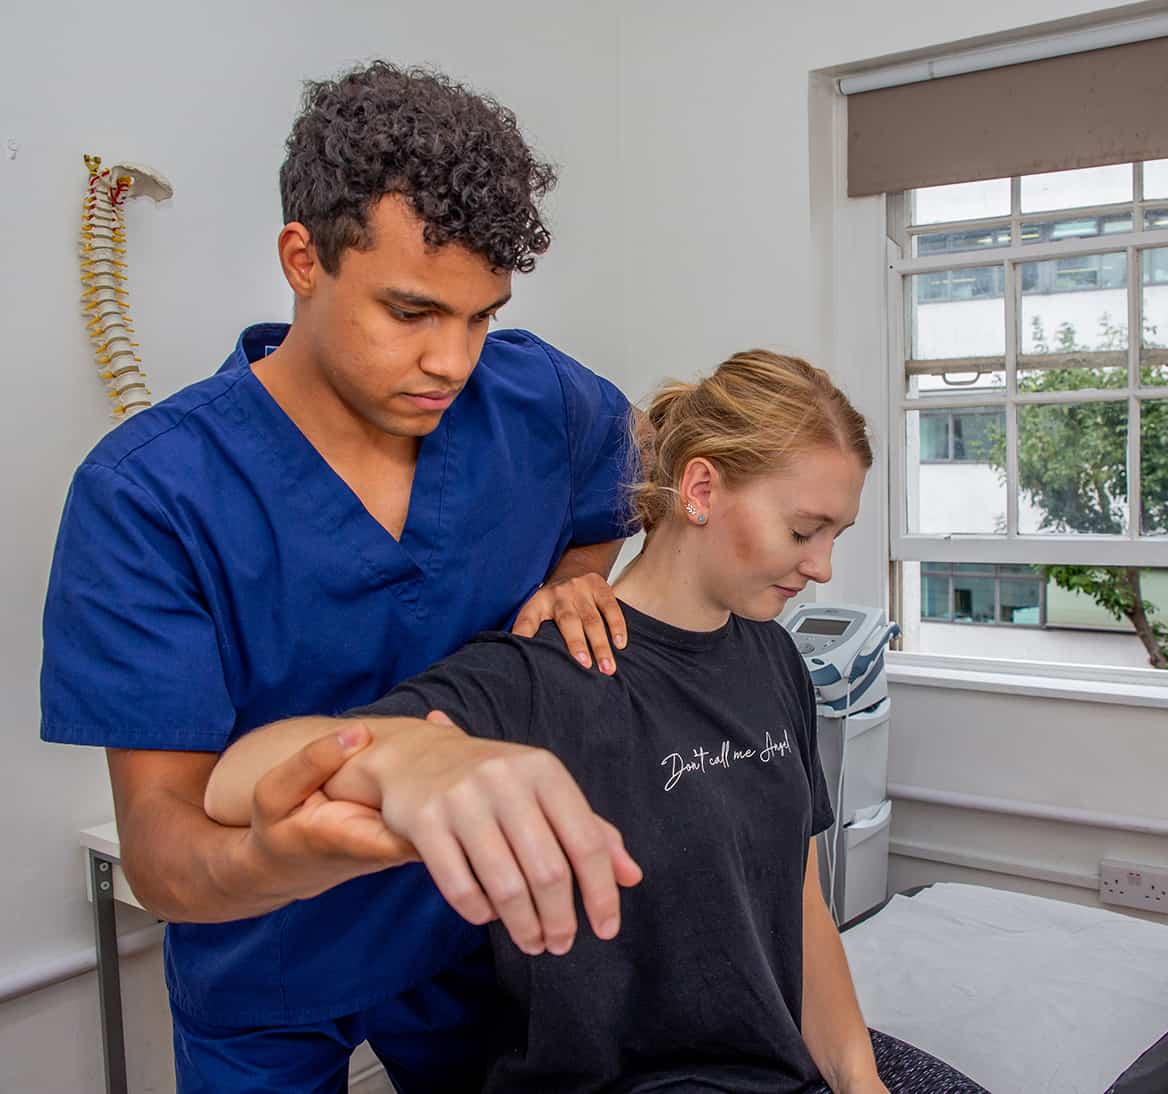 Osteopathy Treating Arm, Elbow, Wrist Pain with Osteopathy